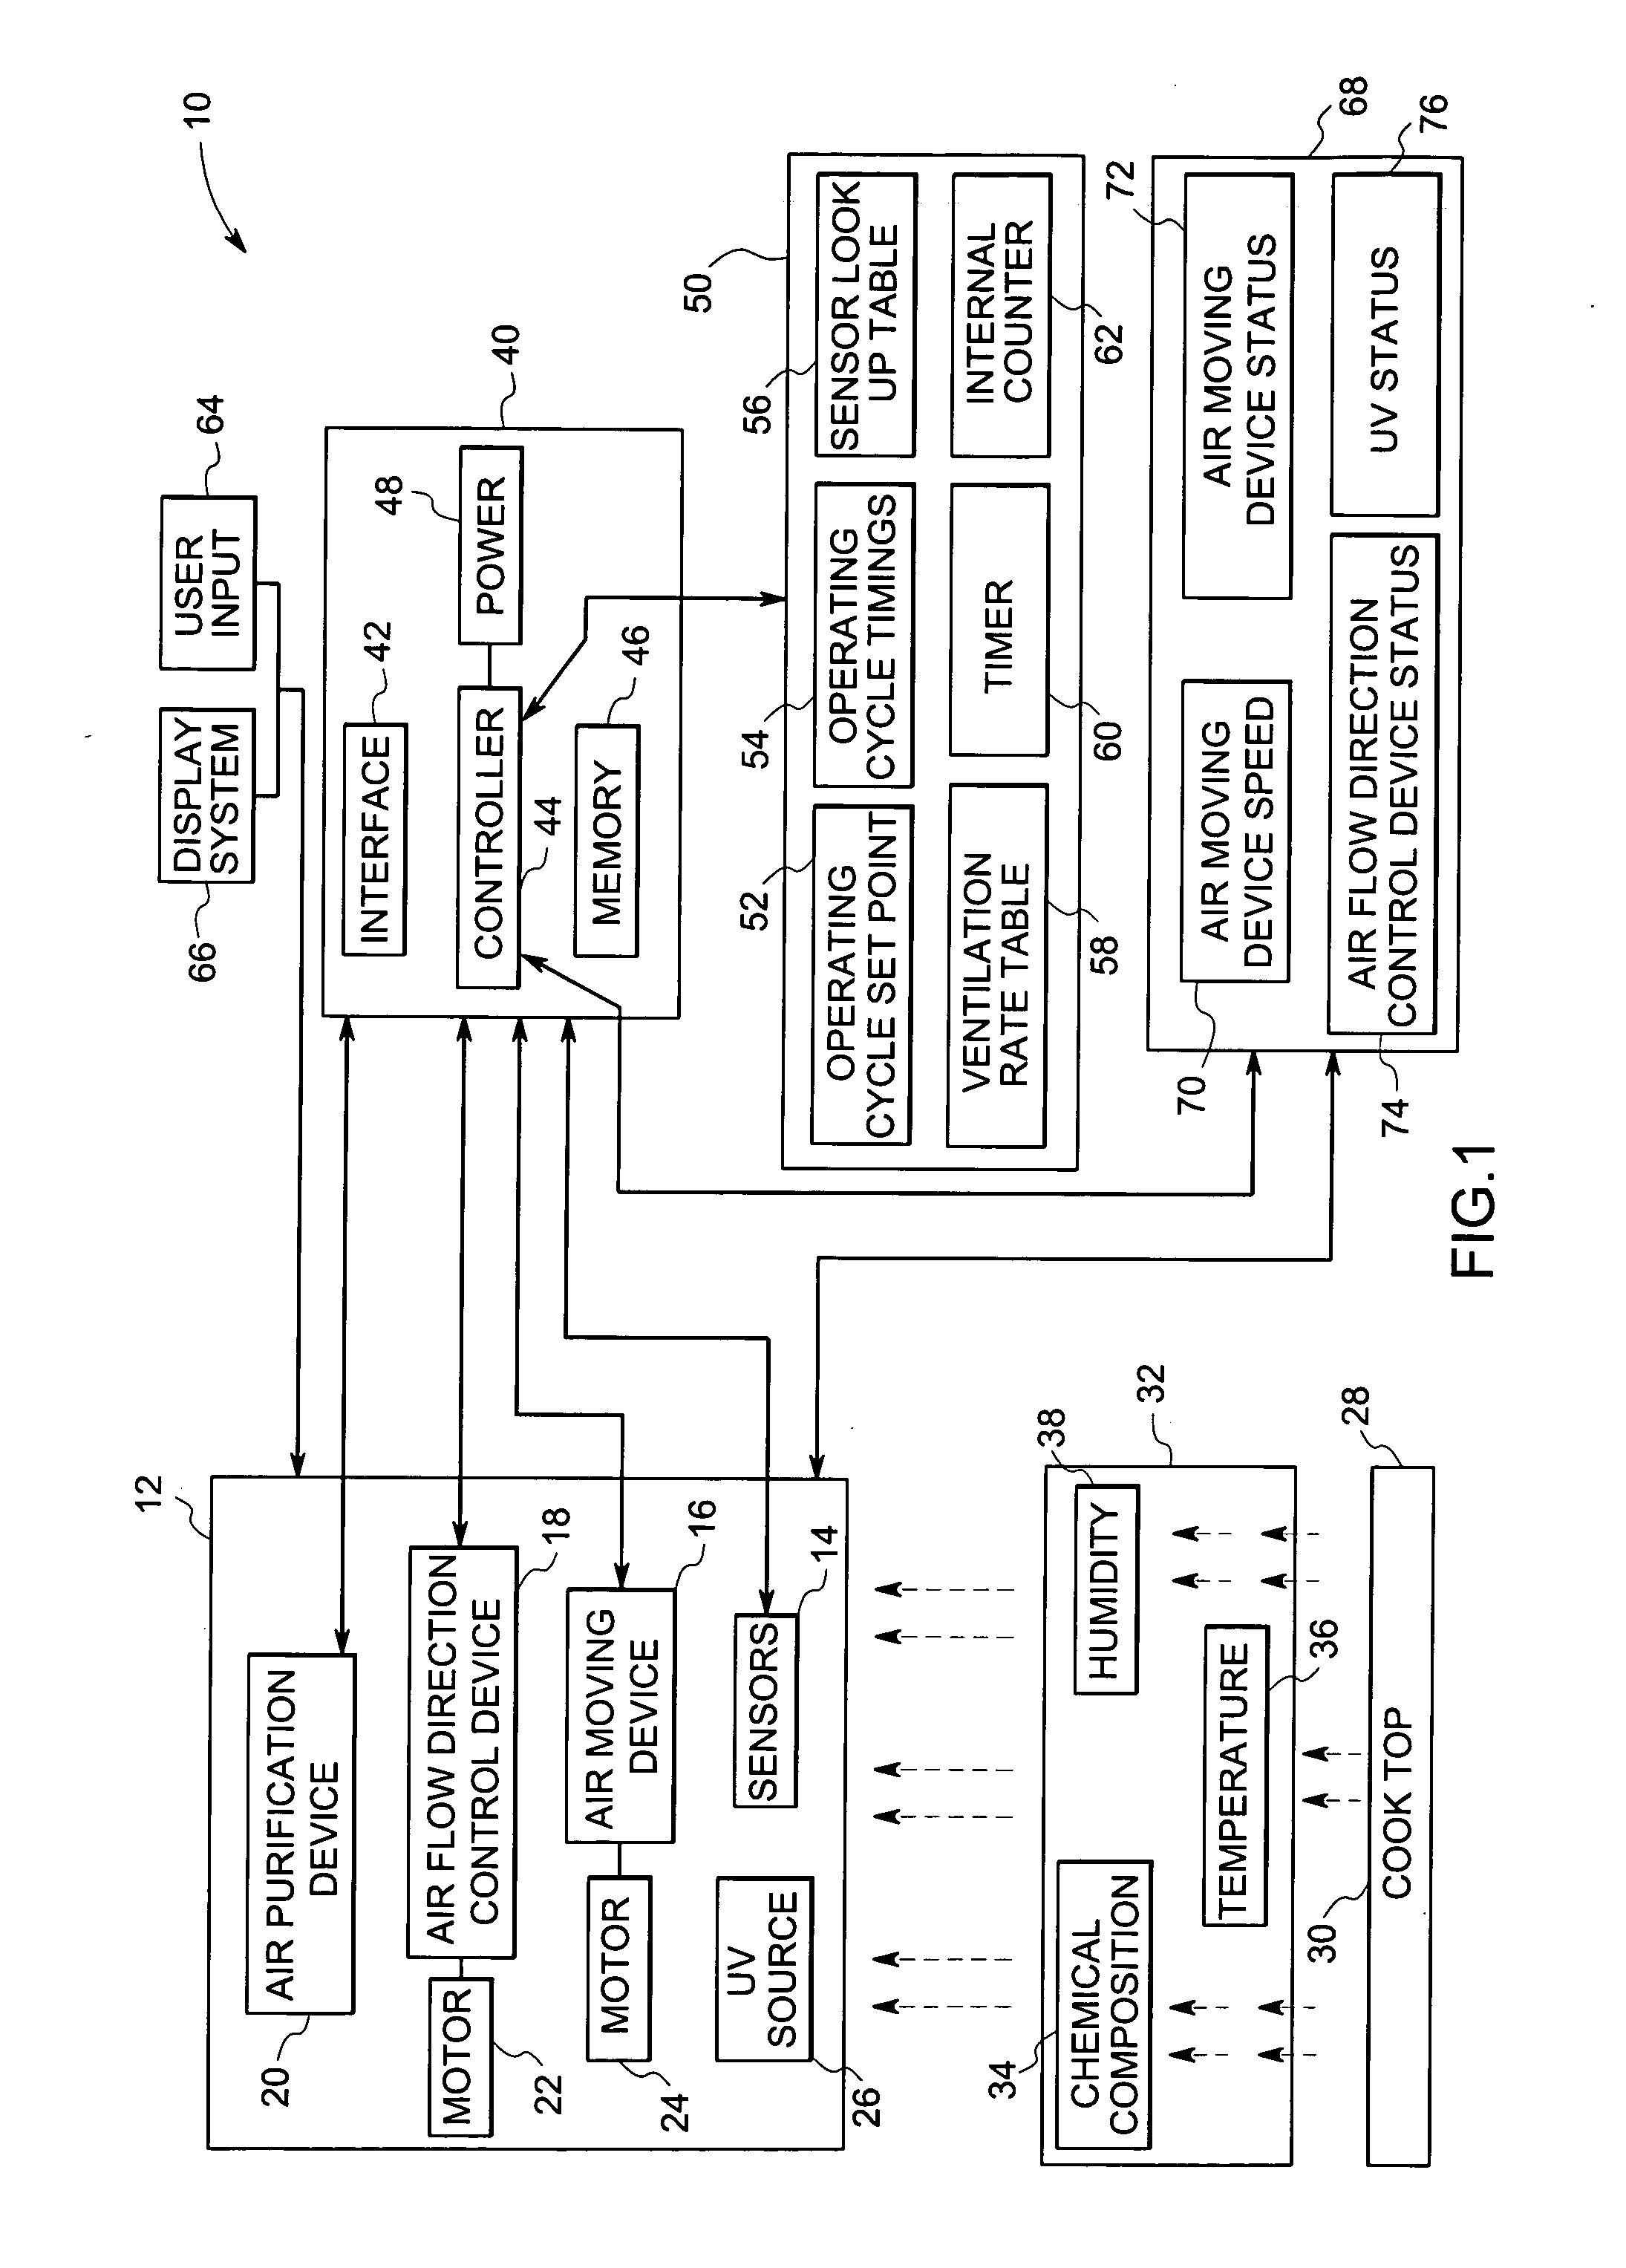 System and method for managing air from a cooktop